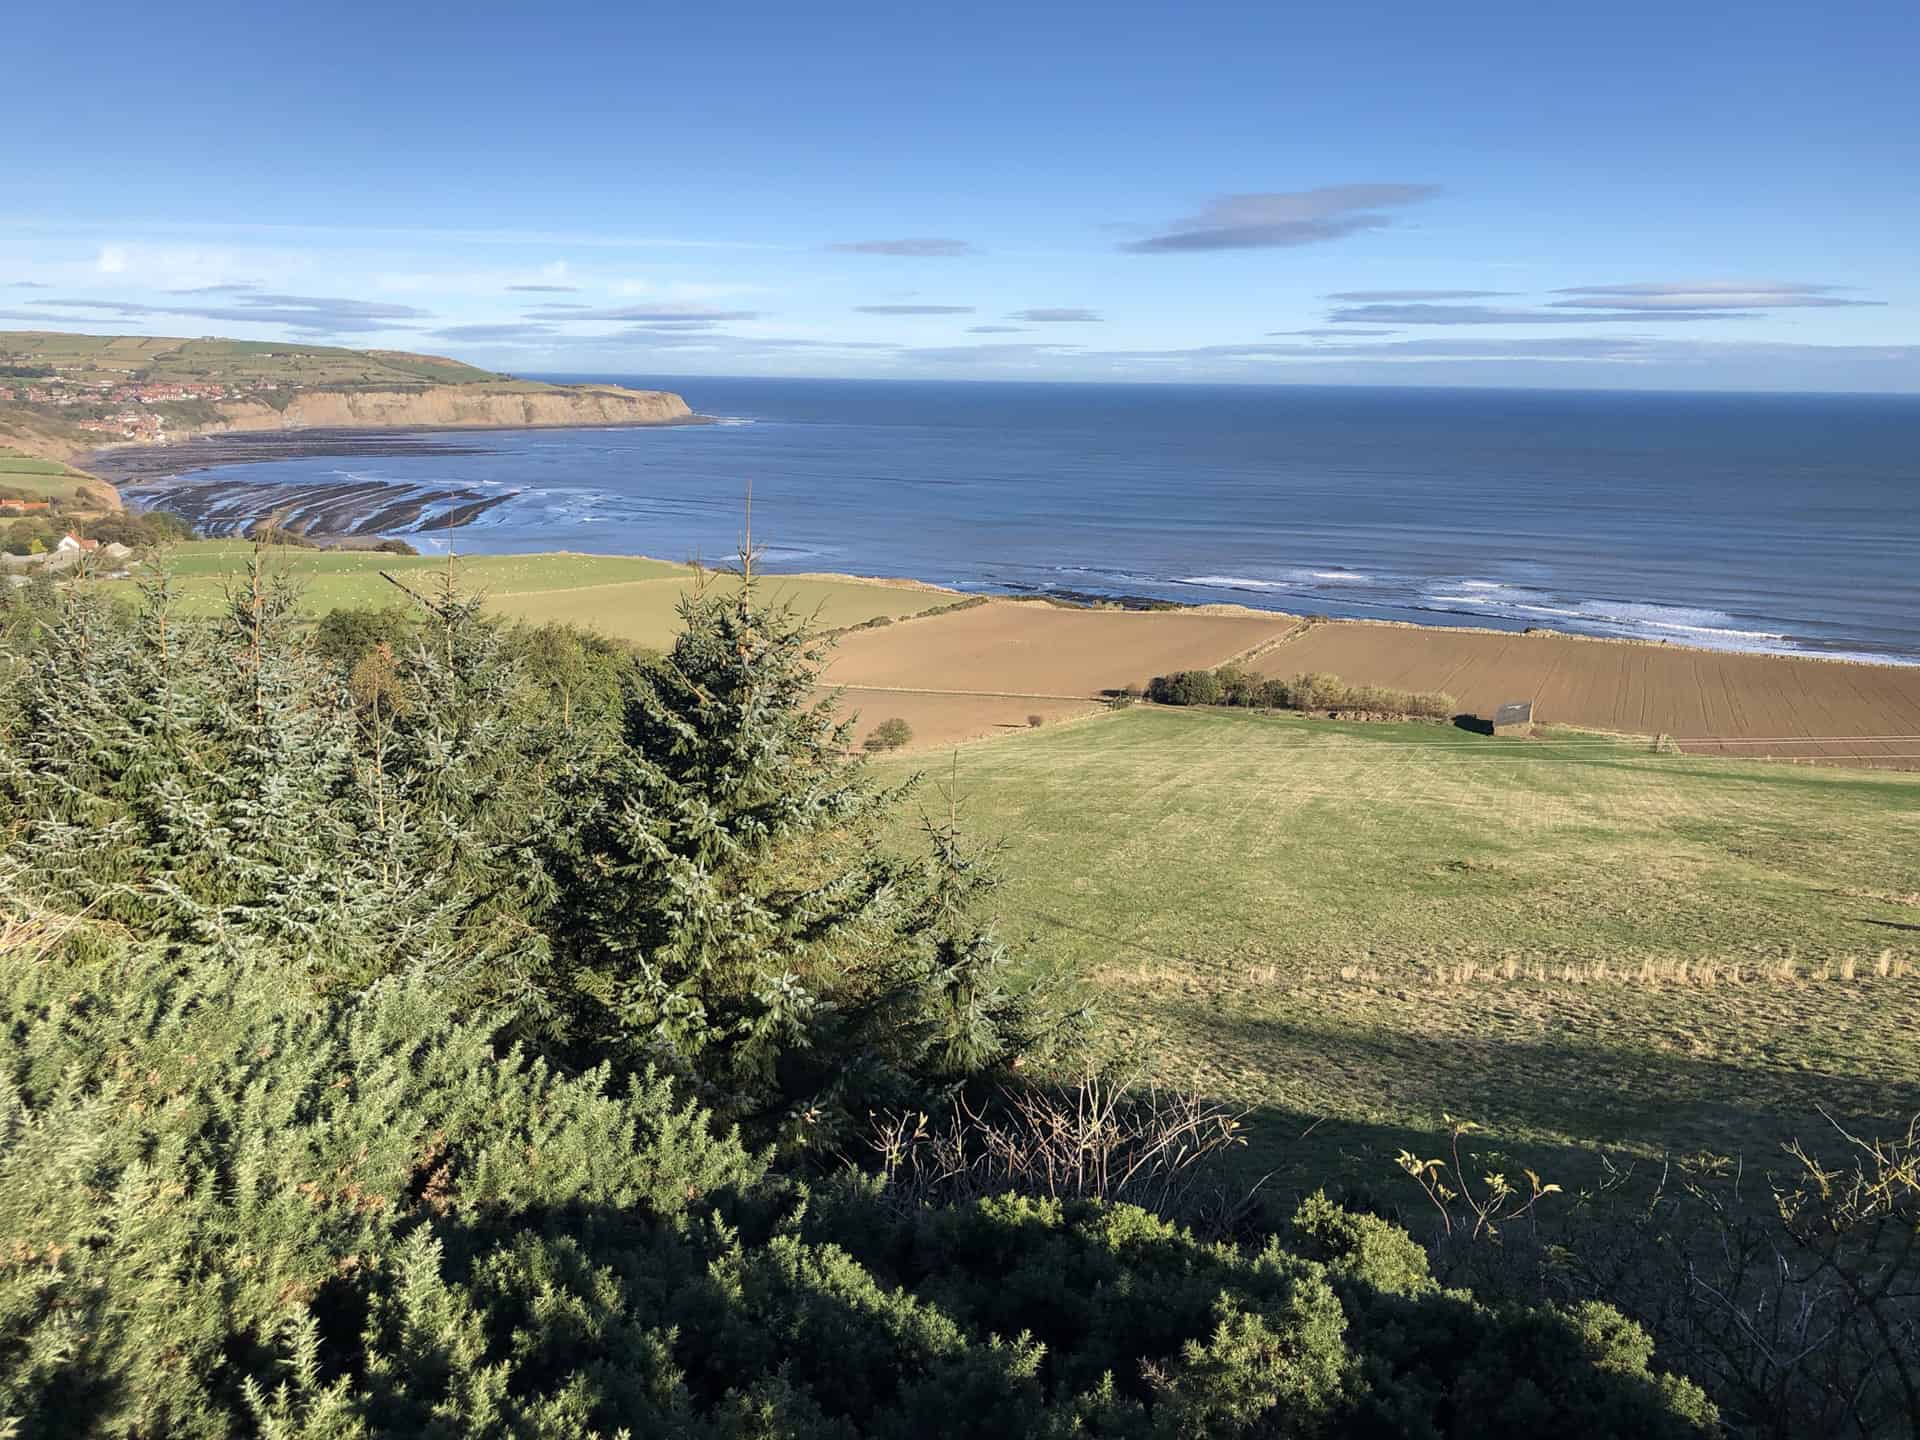 The view towards Robin Hood’s Bay from the Cinder Track dismantled railway line.